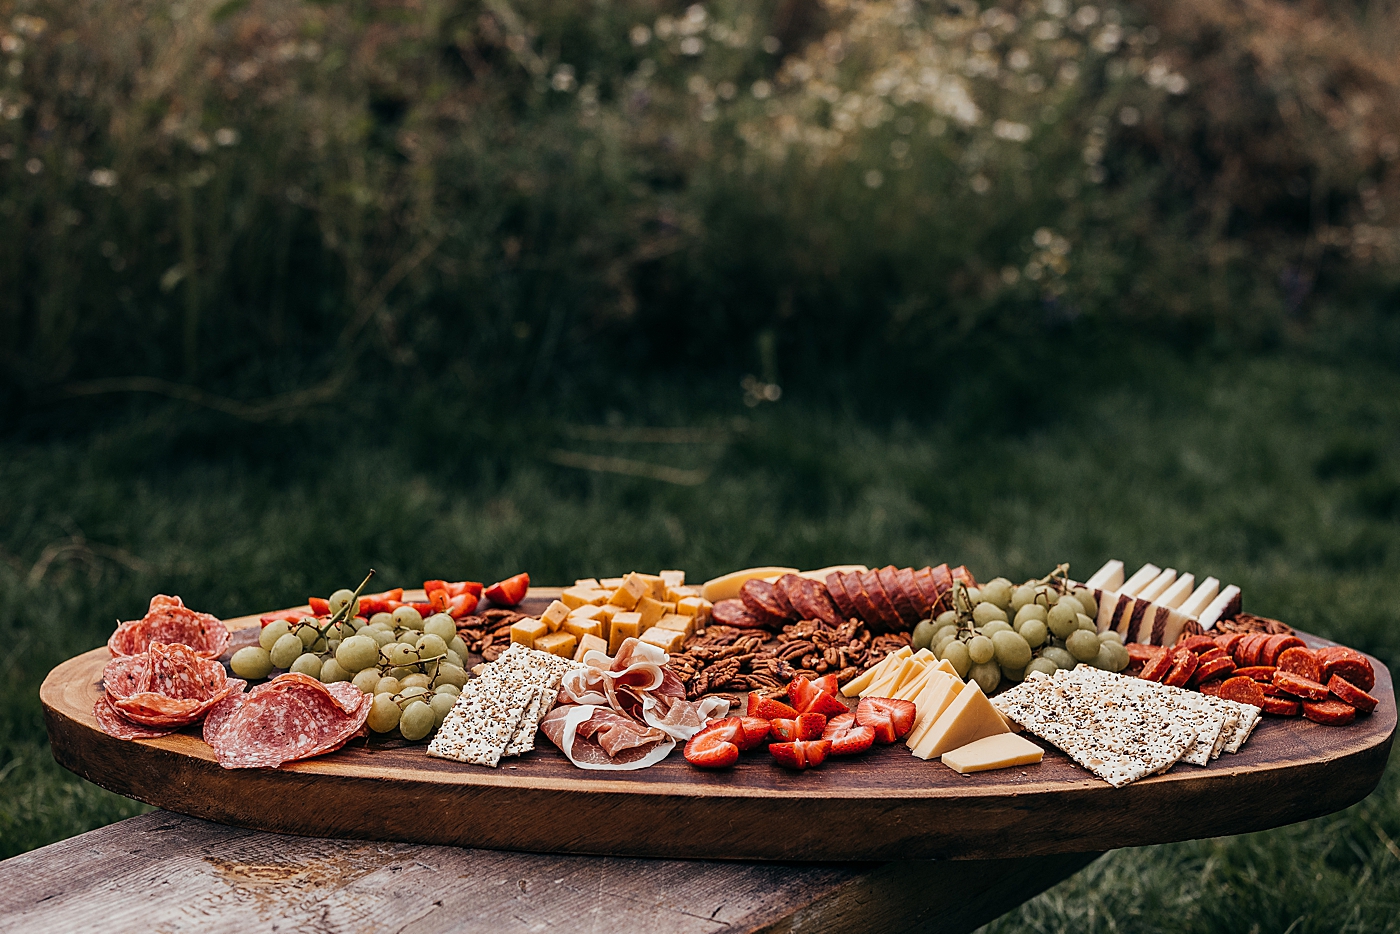 Charcuterie board for sunrise elopement. Photo by Megan Montalvo Photography.